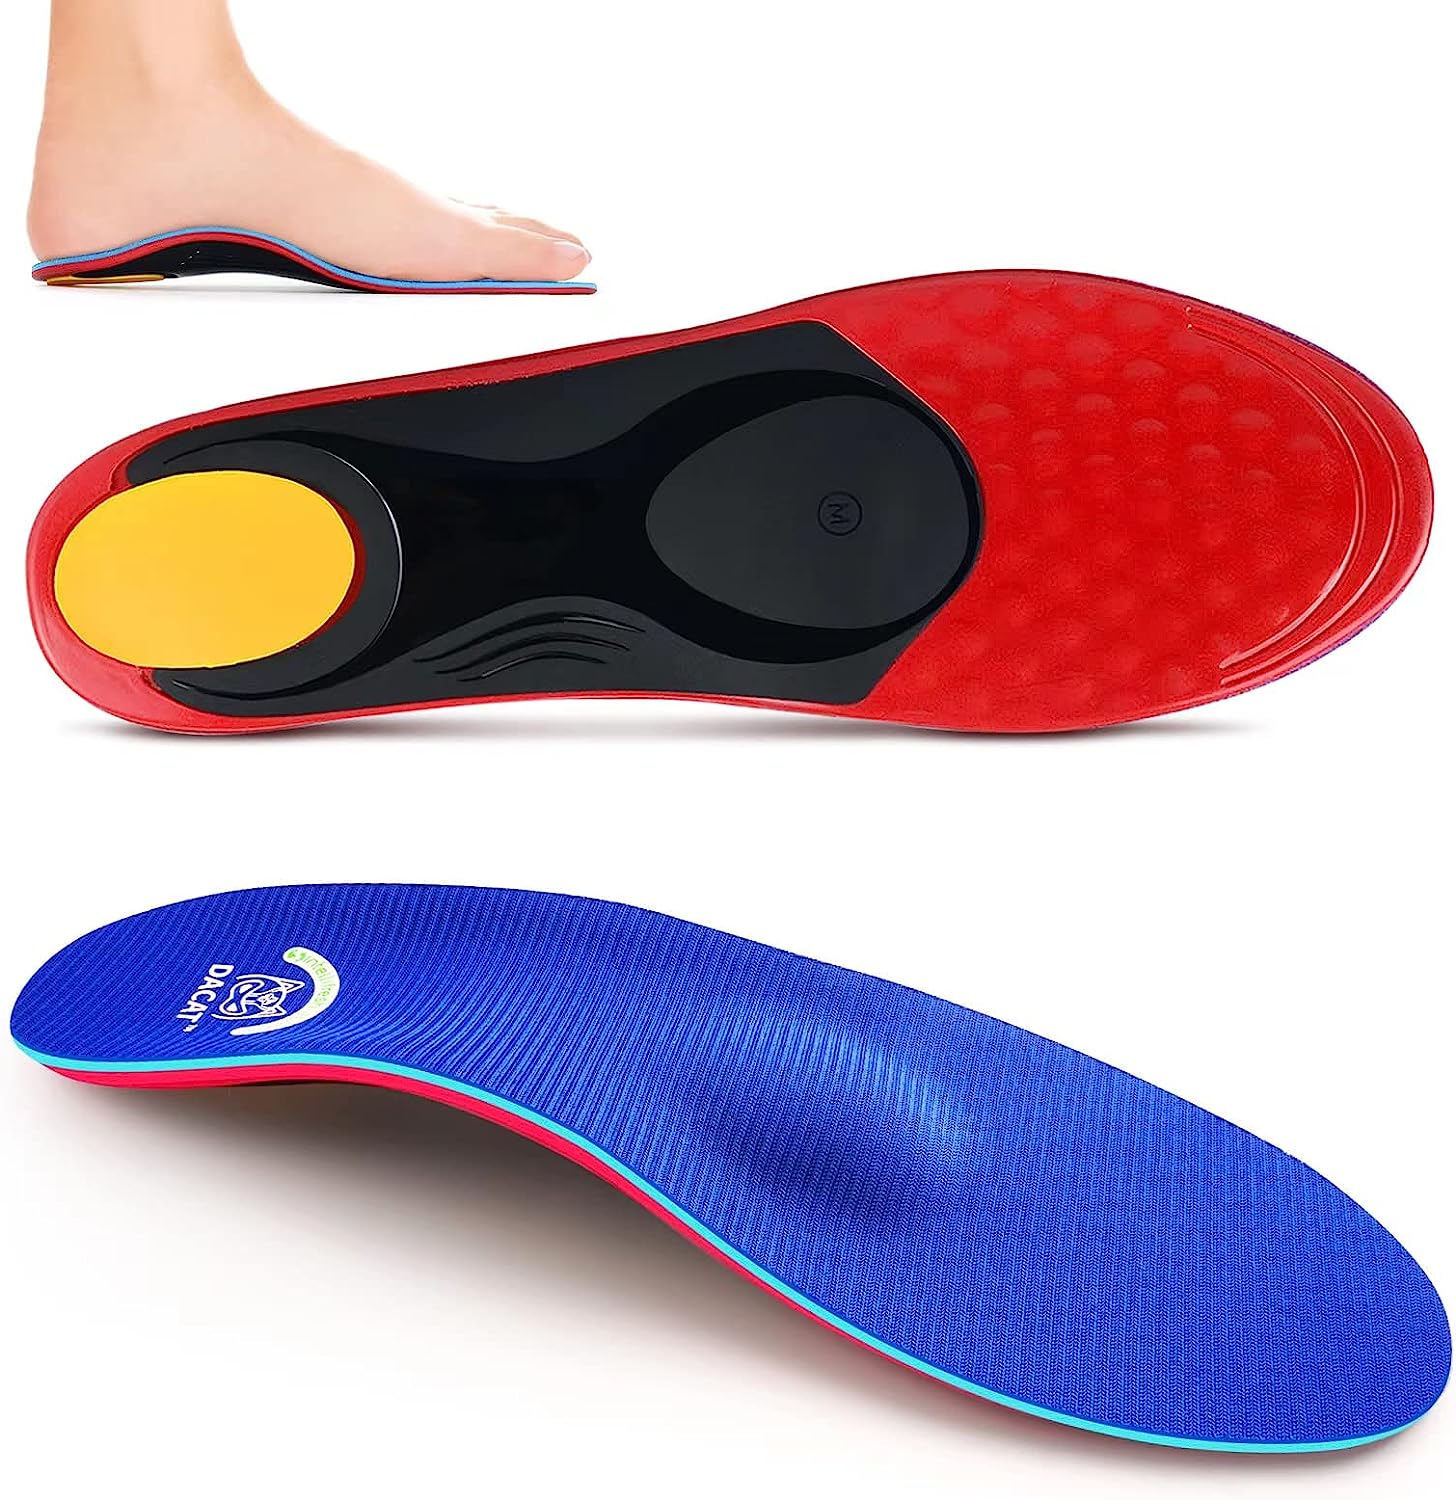 Orthotic Flat Feet Arch Support Insoles - Metatarsal [...]